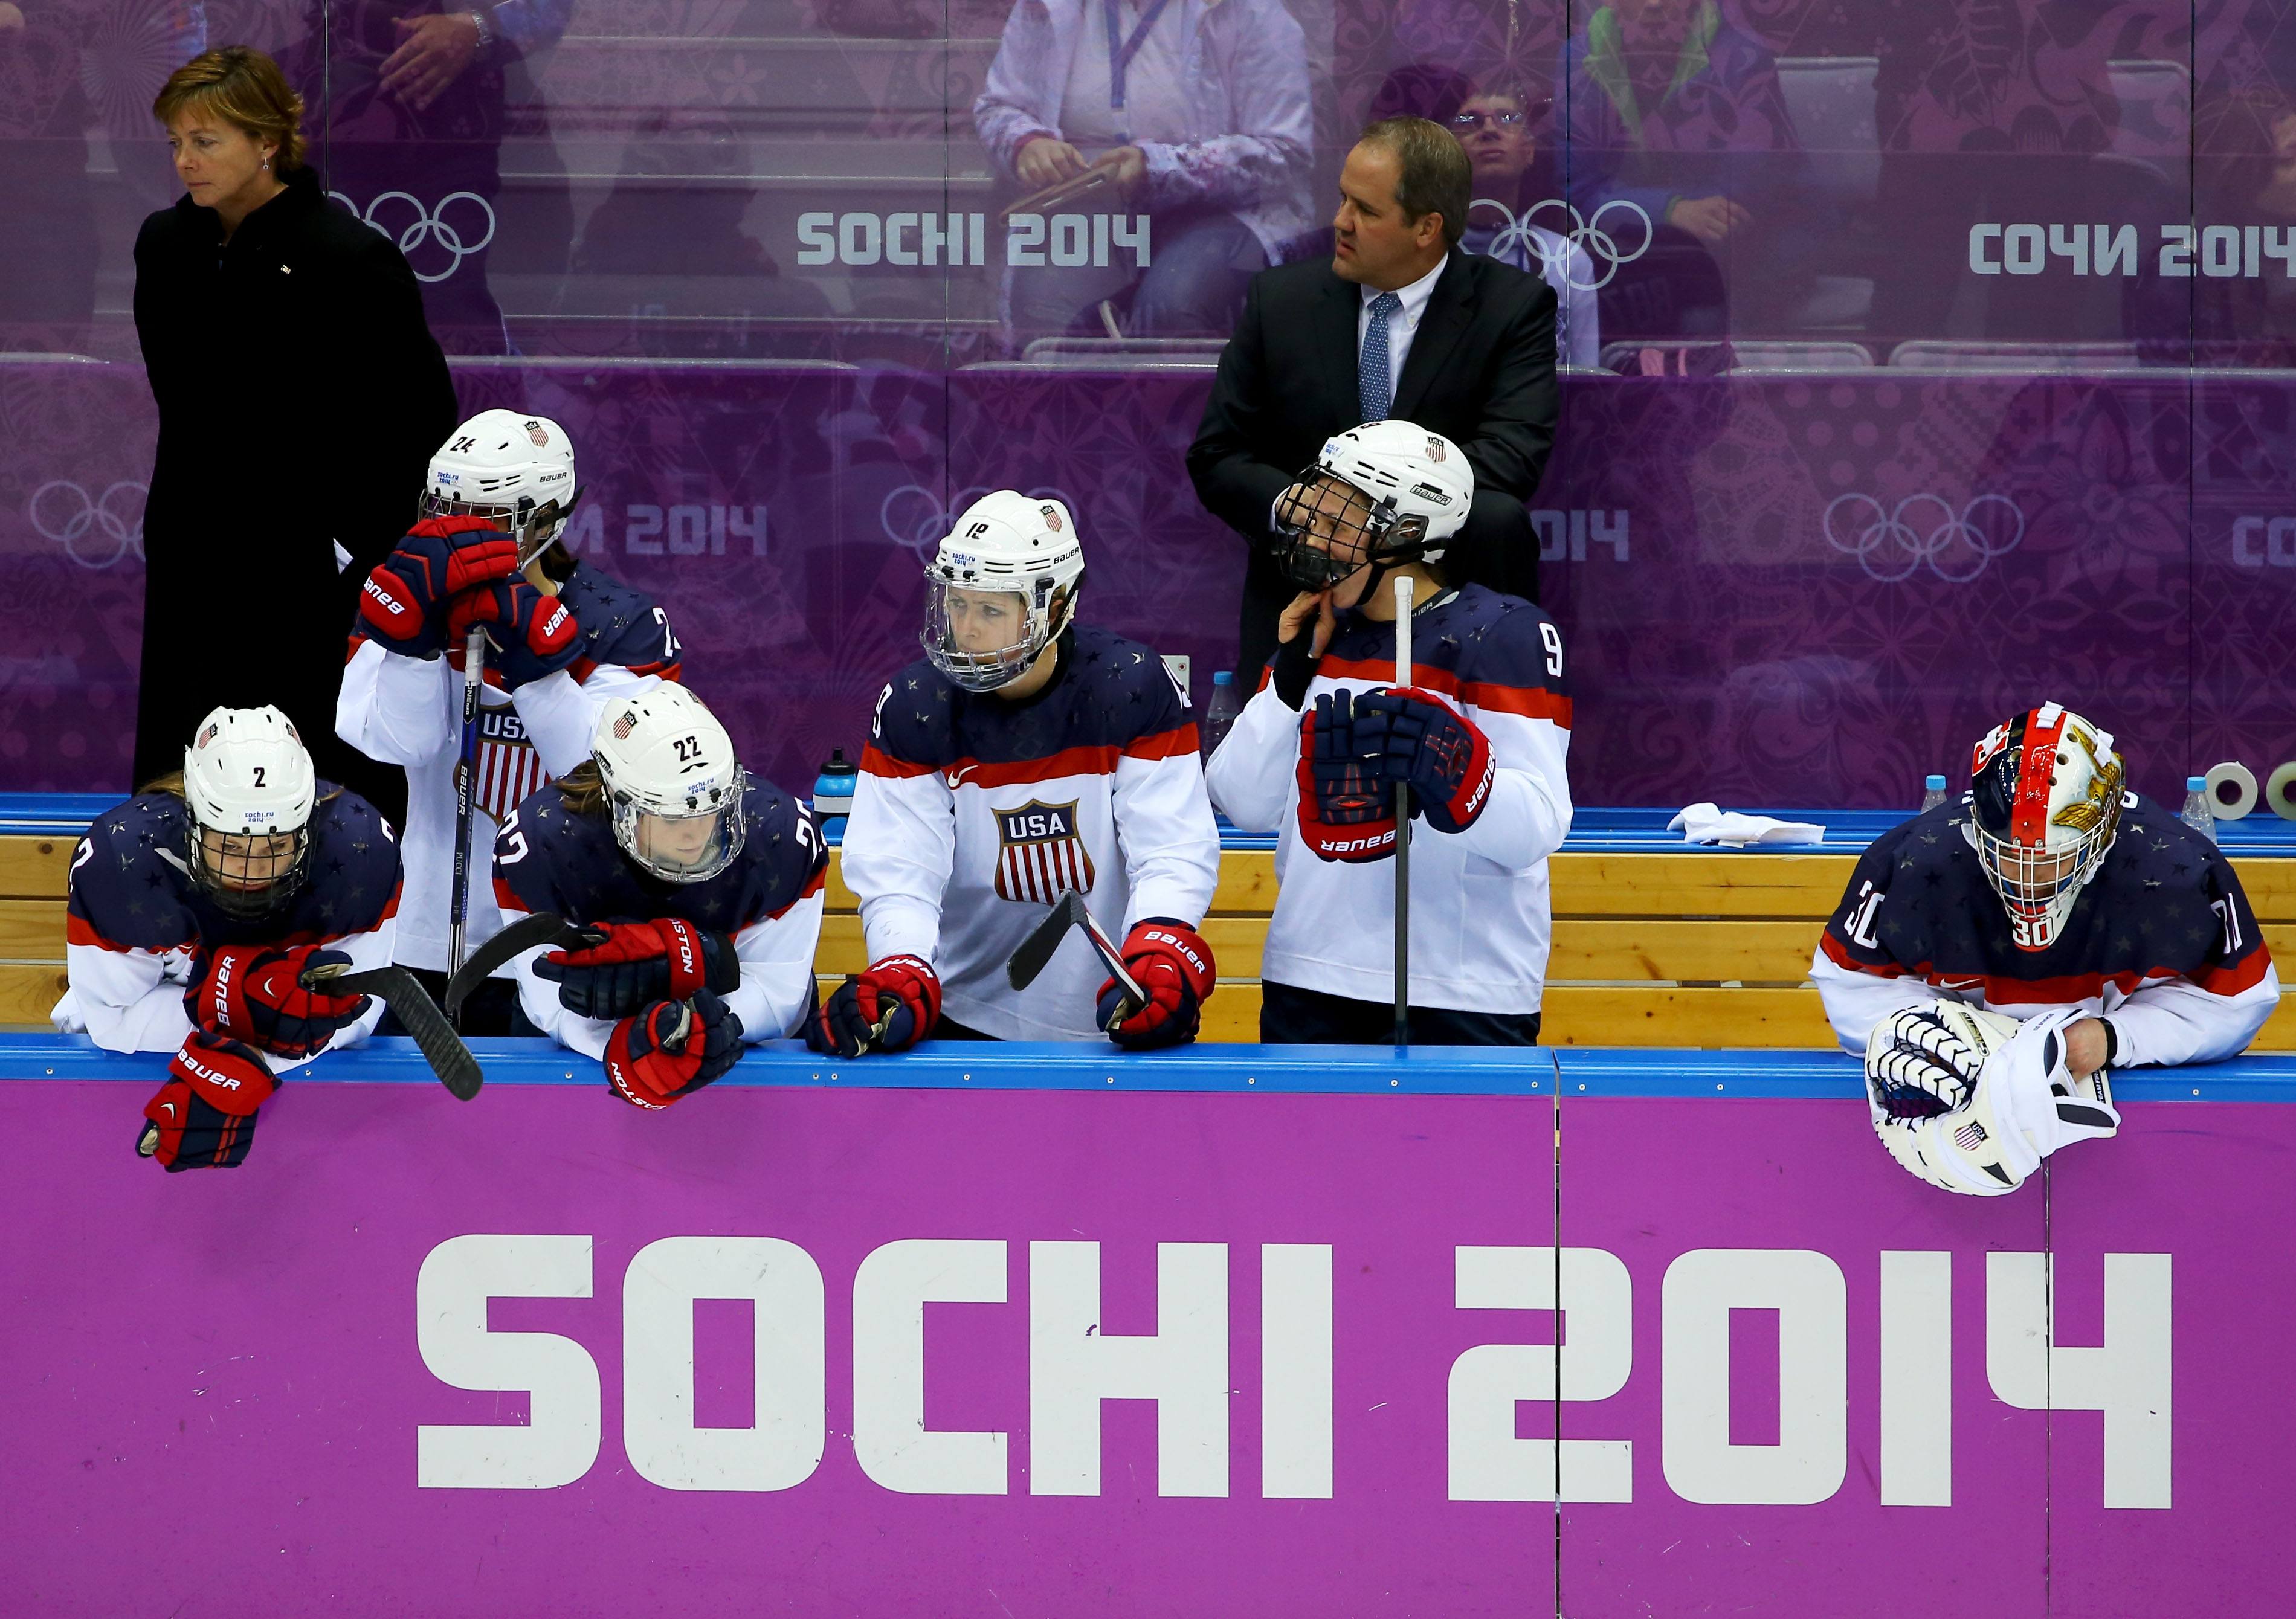 United States players look dejected as Canada win the gold medal during the Ice Hockey Women's Gold Medal Game on day 13 of the Sochi 2014 Winter Olympics at Bolshoy Ice Dome on February 20, 2014 in Sochi, Russia.